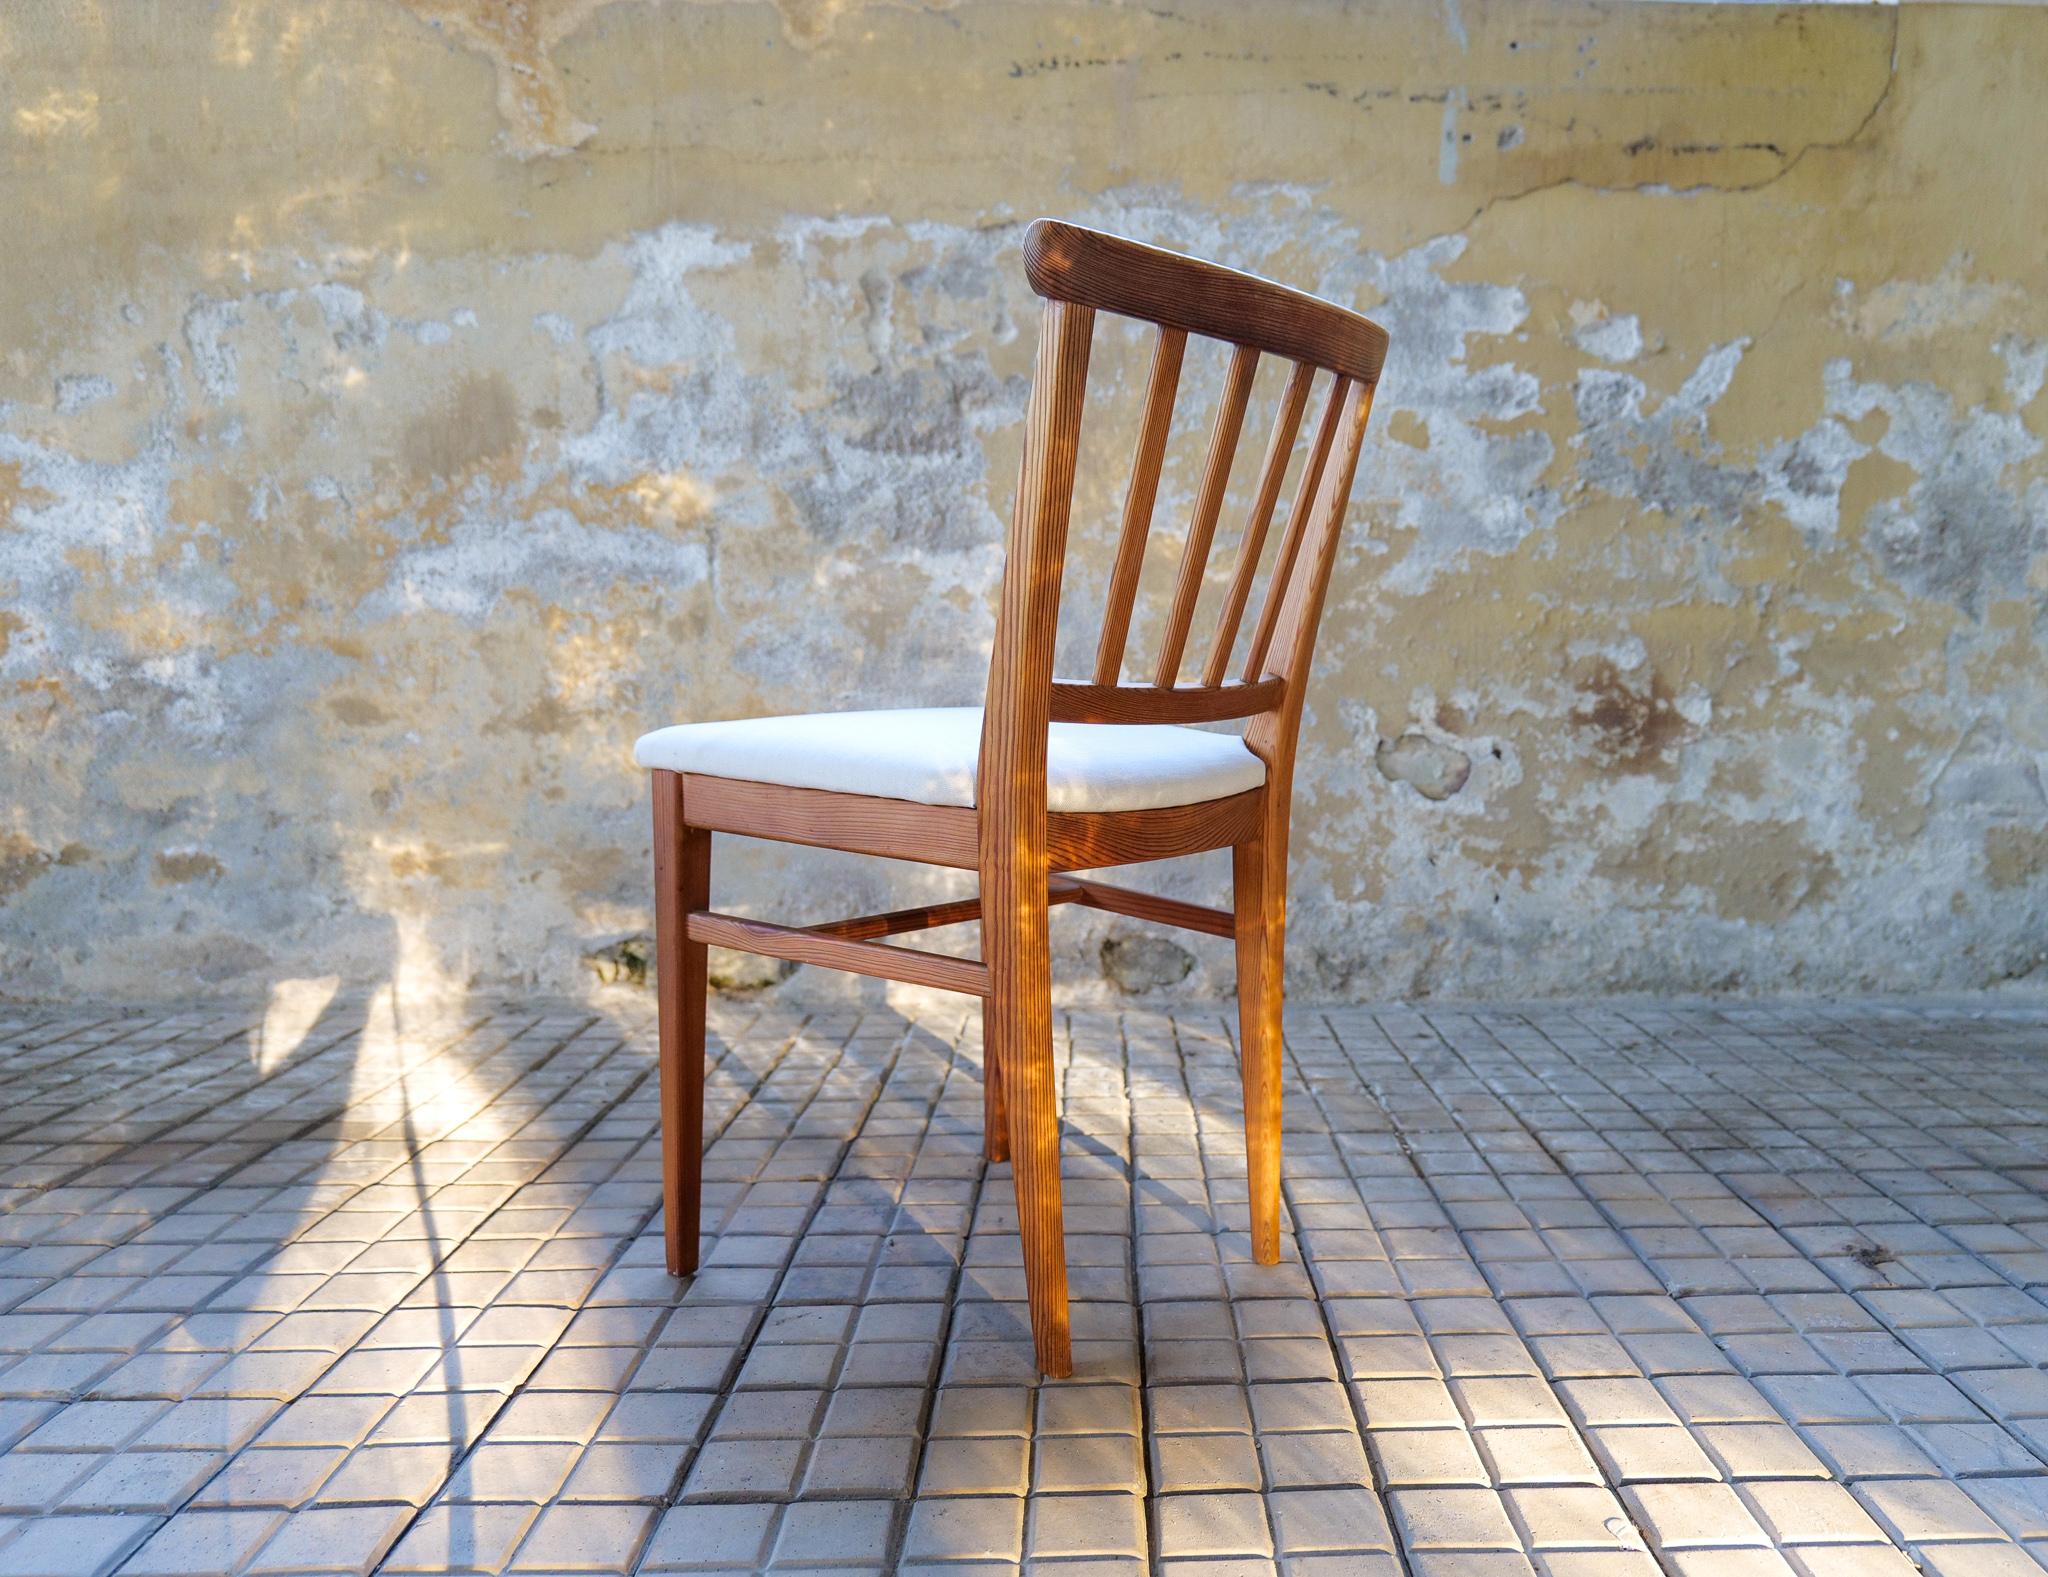 Midcentury Set of 4 Carl Malmsten Chairs Dining in Pine, Sweden, 1940s For Sale 3